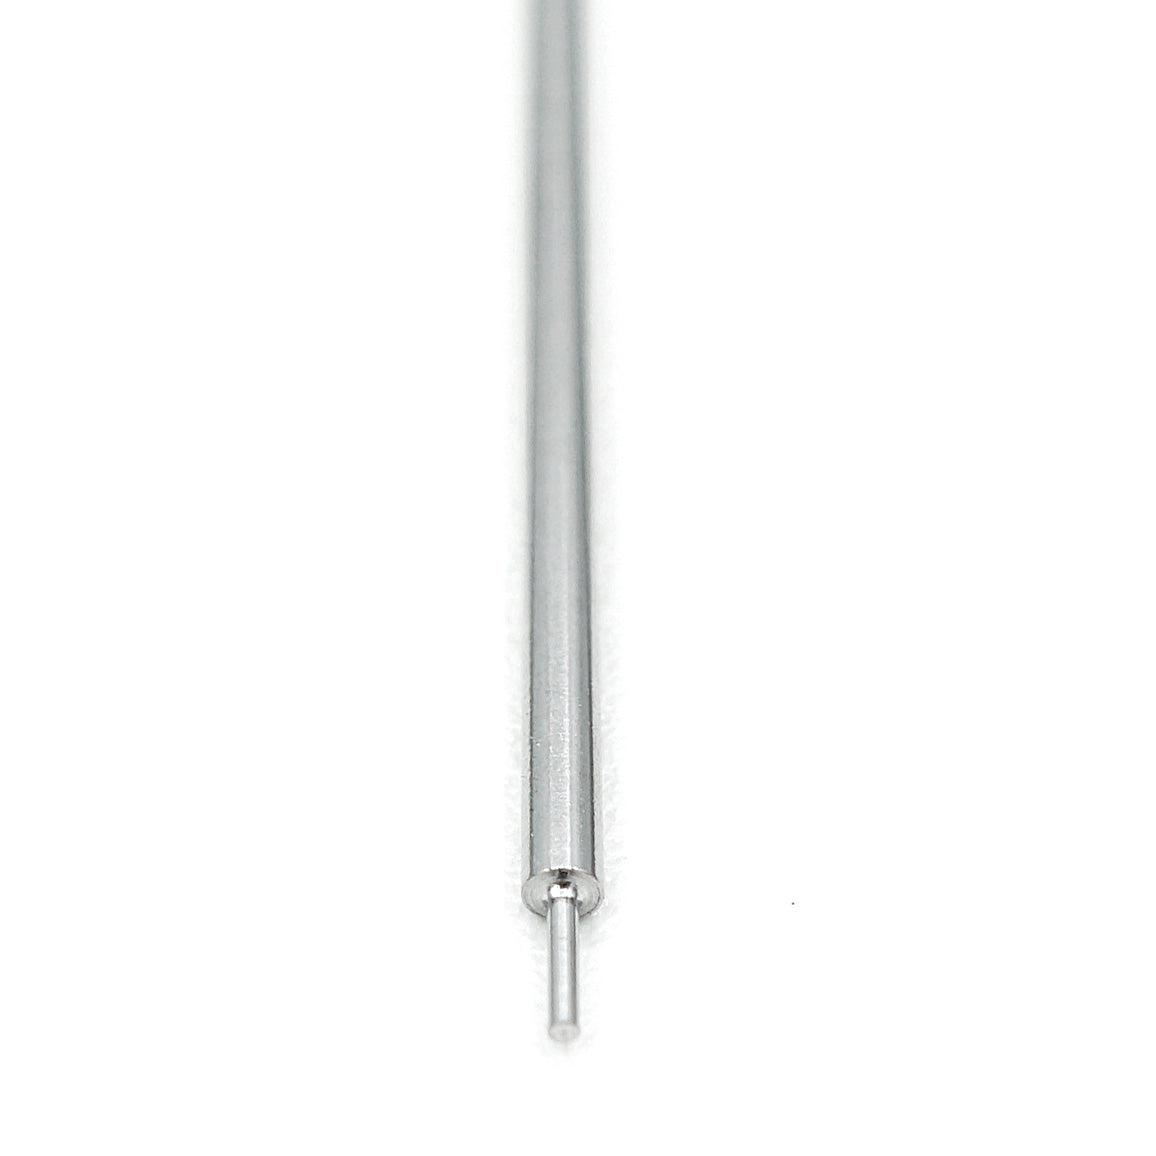 Stiletto Piercing Tapers - 18G - Piercing Tapers - Mithra Tattoo Supplies Canada